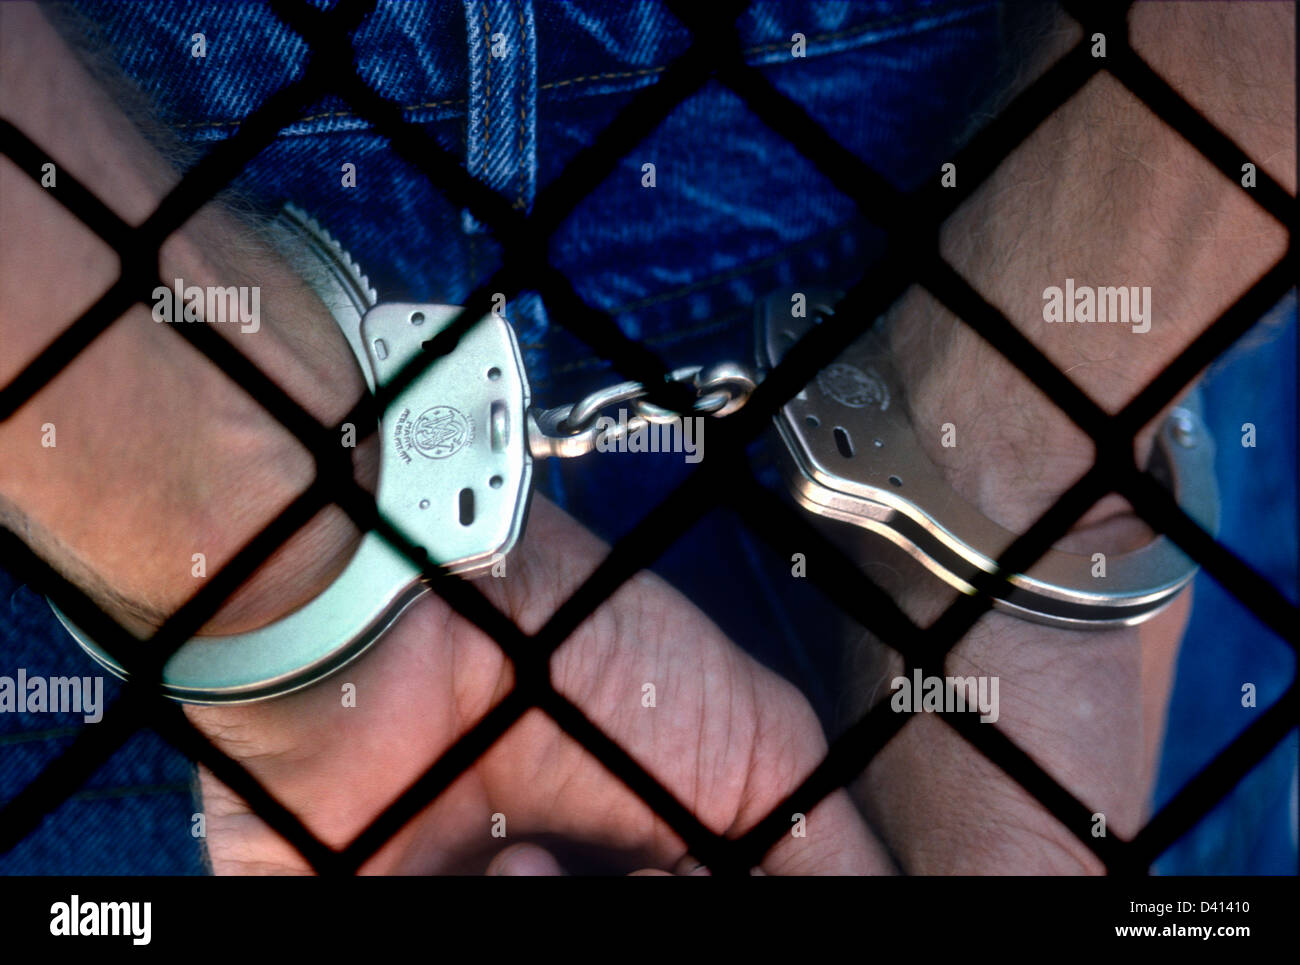 man-with-hands-handcuffed-behind-chain-l